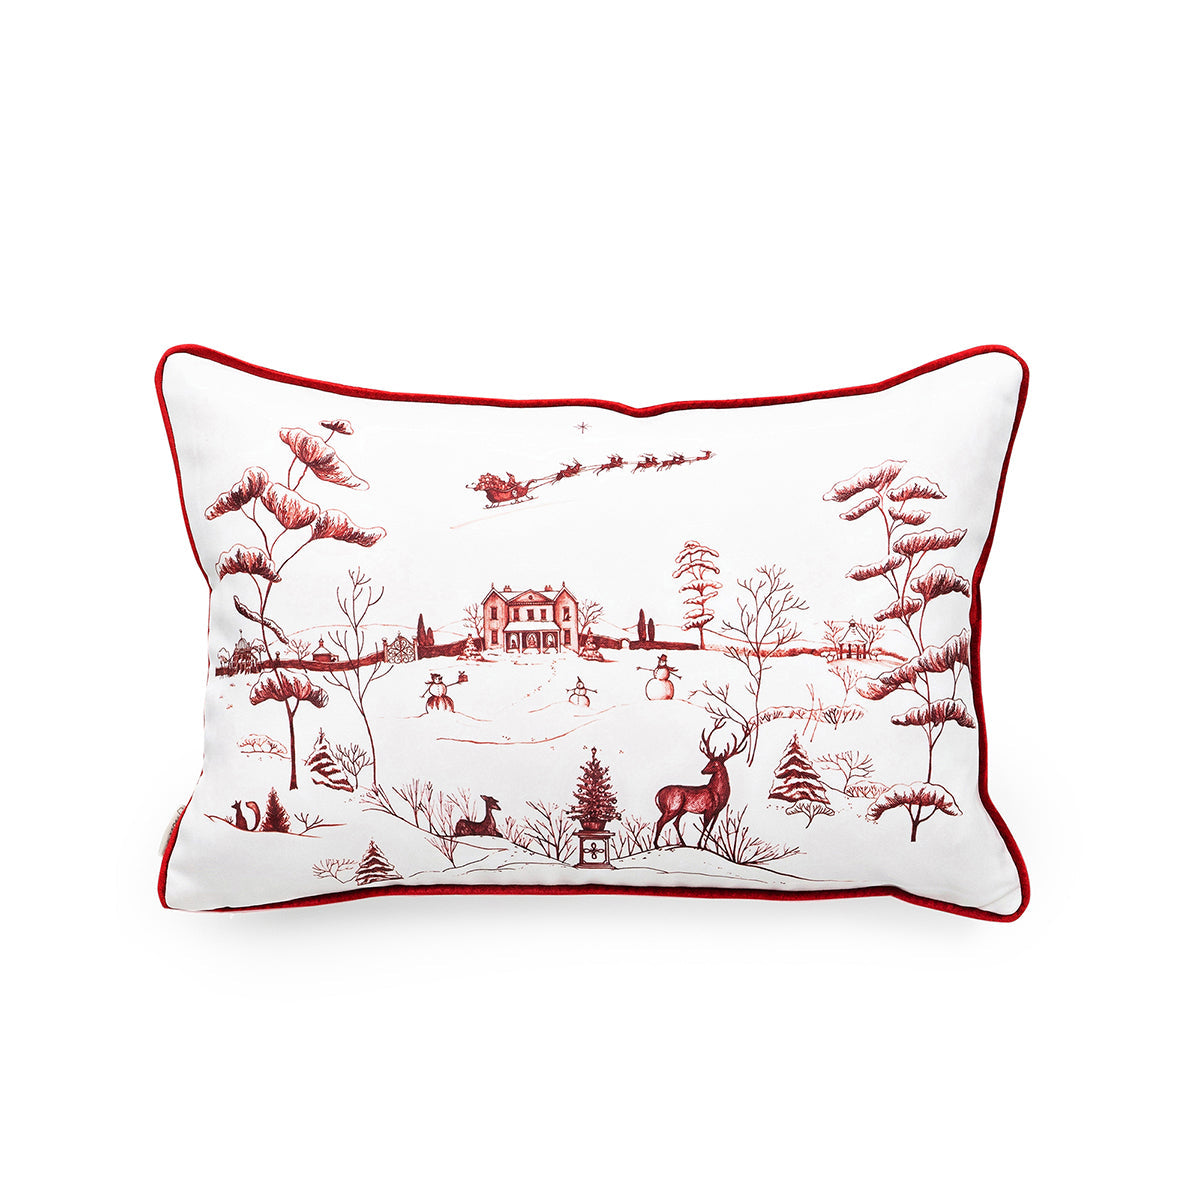 Feather your nest for the Holidays with this gorgeous ruby red and white decorative pillow, featuring illustrations of our snow covered Country Estate. Find woodland creatures, playful snowmen and Santa and his sleigh flying over the Main House, and enjoy a festive plaid motif on the back for possible reversible display.